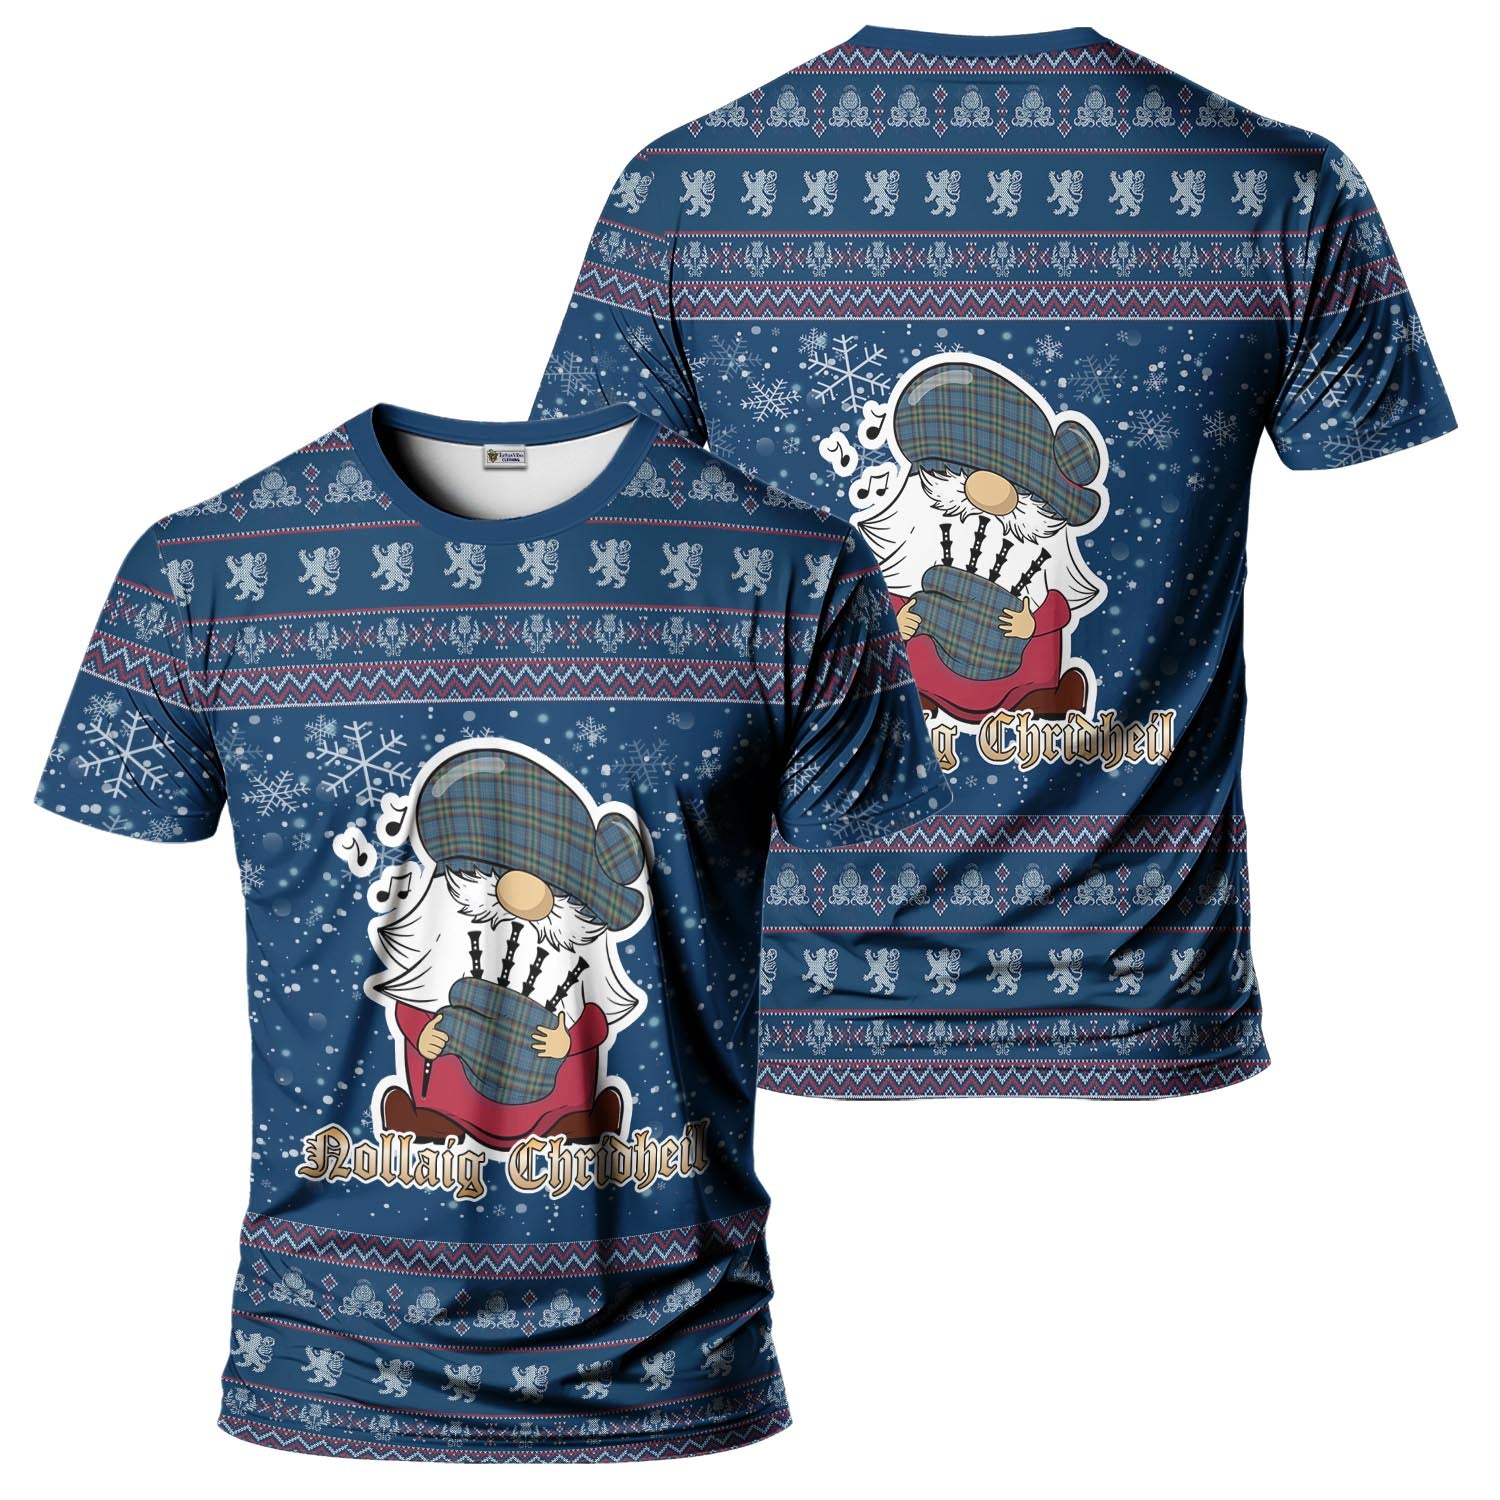 Ralston UK Clan Christmas Family T-Shirt with Funny Gnome Playing Bagpipes Kid's Shirt Blue - Tartanvibesclothing